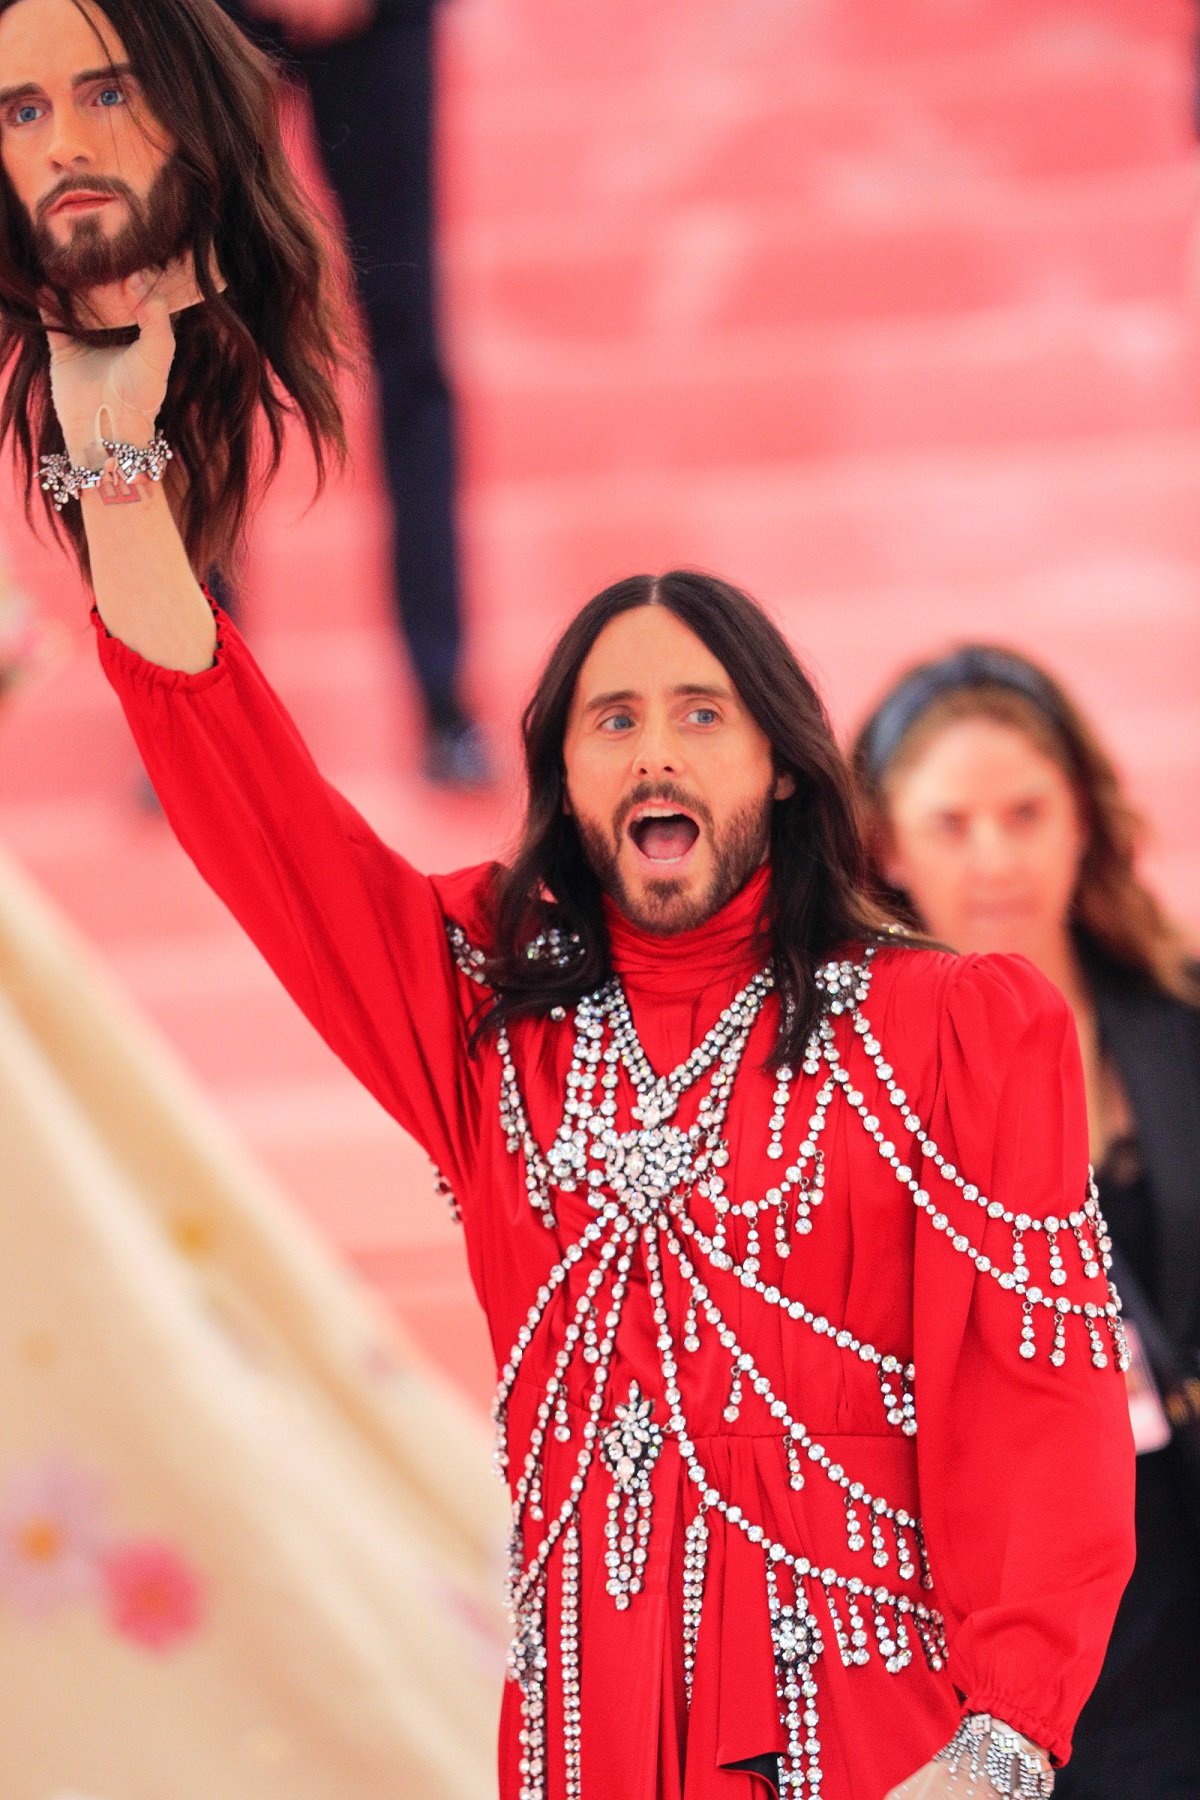 Jared Leto at the Met Gala on May 06, 2019 in New York City | Source: Getty Images 